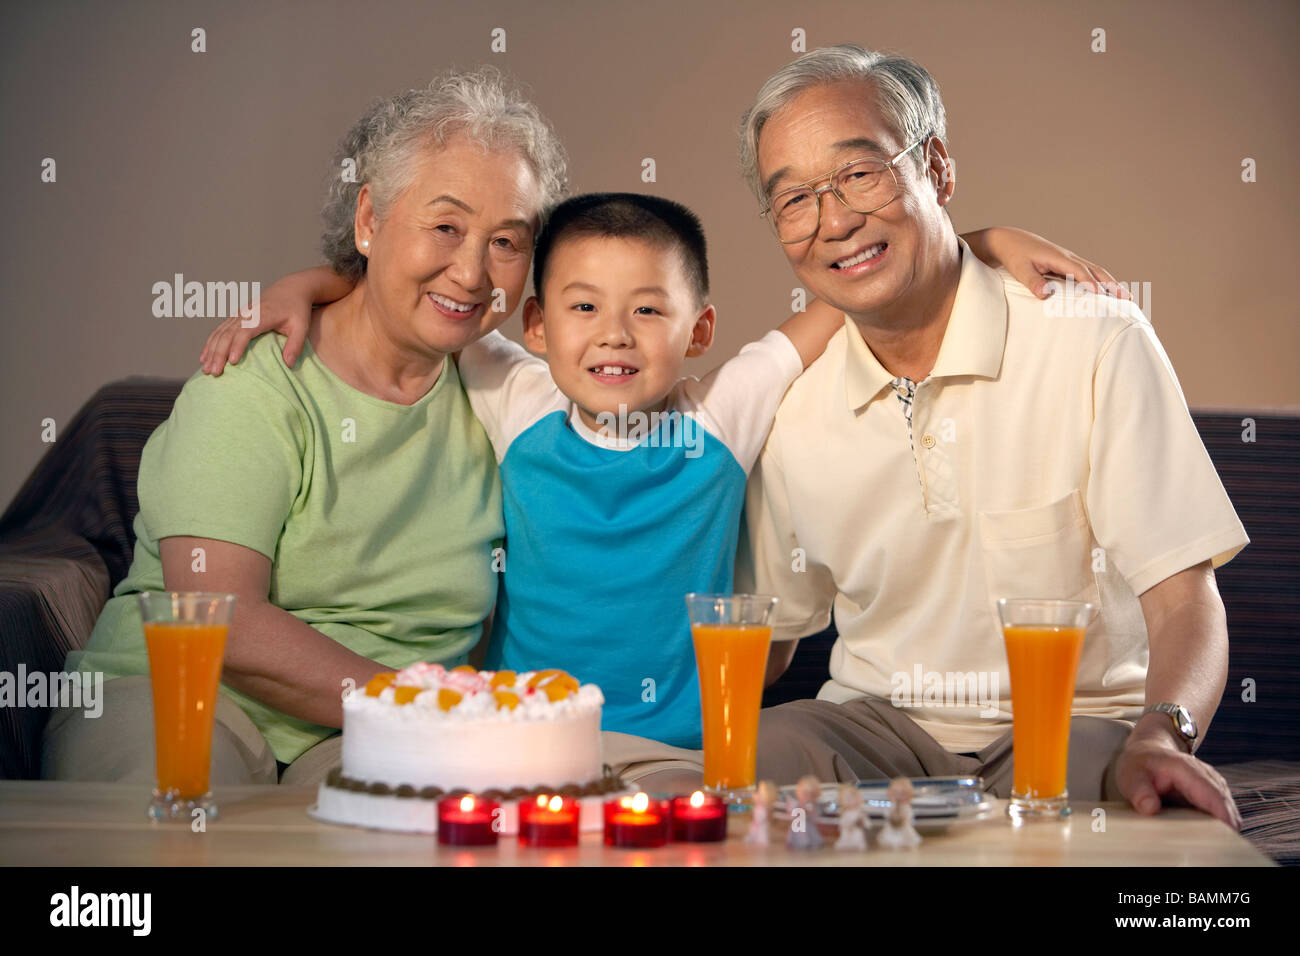 Grandparents And Their Grandson Celebrate A Birthday Stock Photo